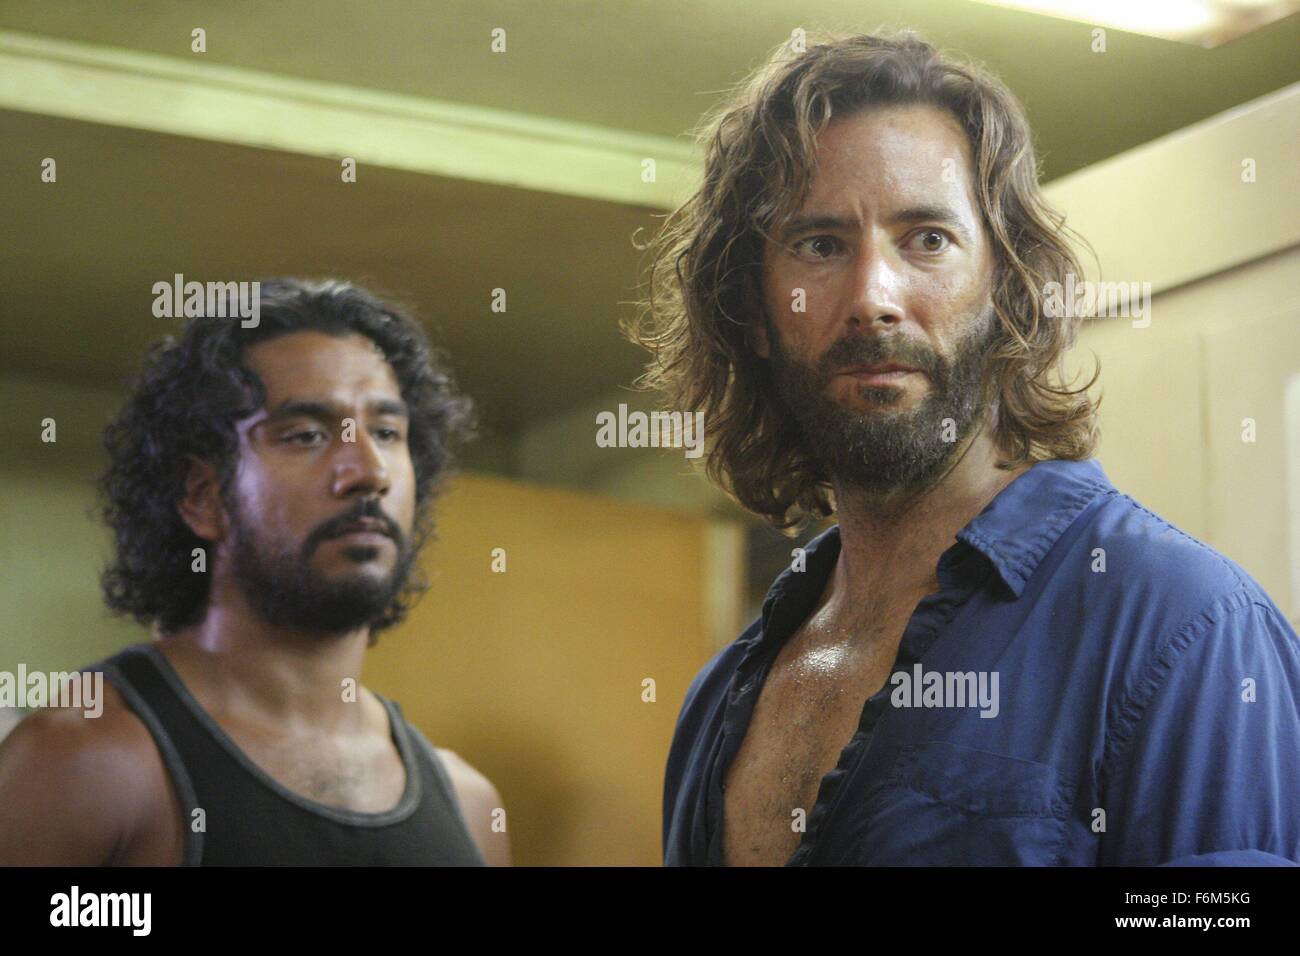 RELEASE DATE: 2004-2010 DIRECTOR: J.J. Abrams PLOT: The survivors of a plane crash are forced to live with each other on a remote island, a dangerous new world that poses unique threats of its own PICTURED: Lost - ''The Constant'' - Naveen Andrews, Henry Ian Cusick..Lost Season 4 - 2008. (Credit: c ABC Studios/Entertainment Pictures) Stock Photo